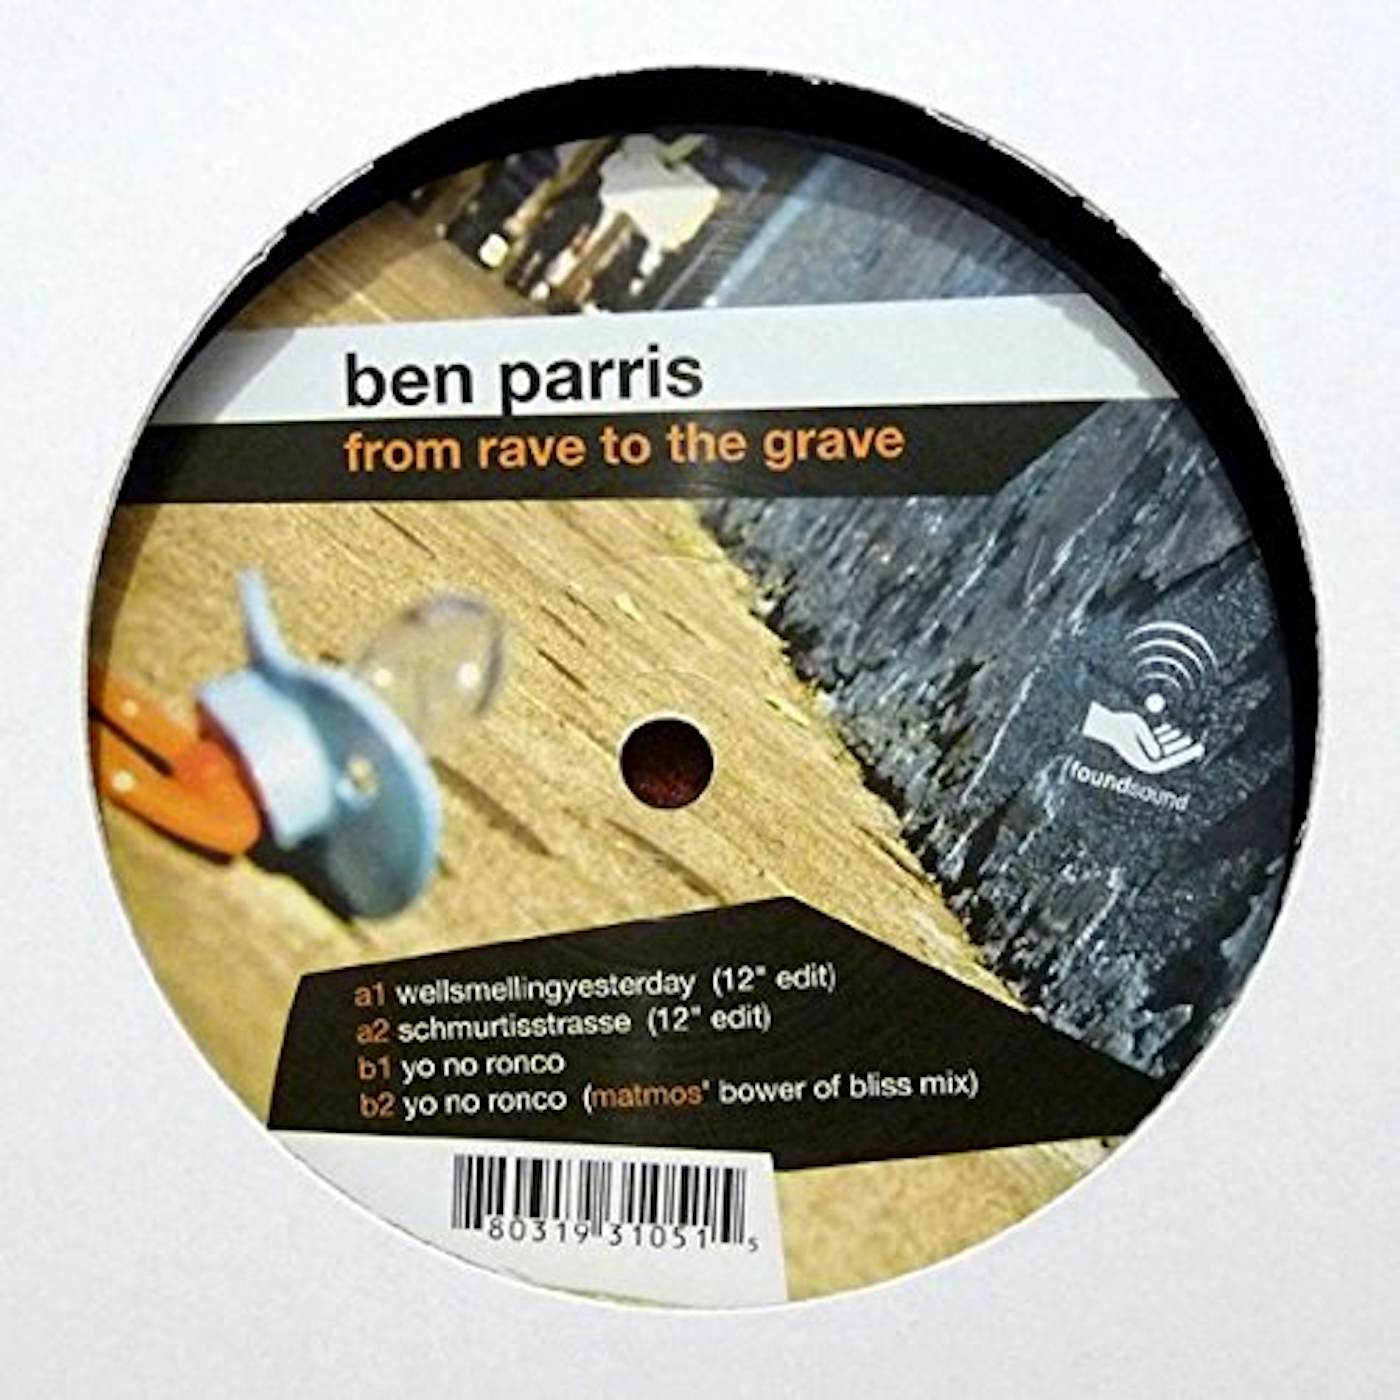 Ben Parris From Rave to the Grave Vinyl Record